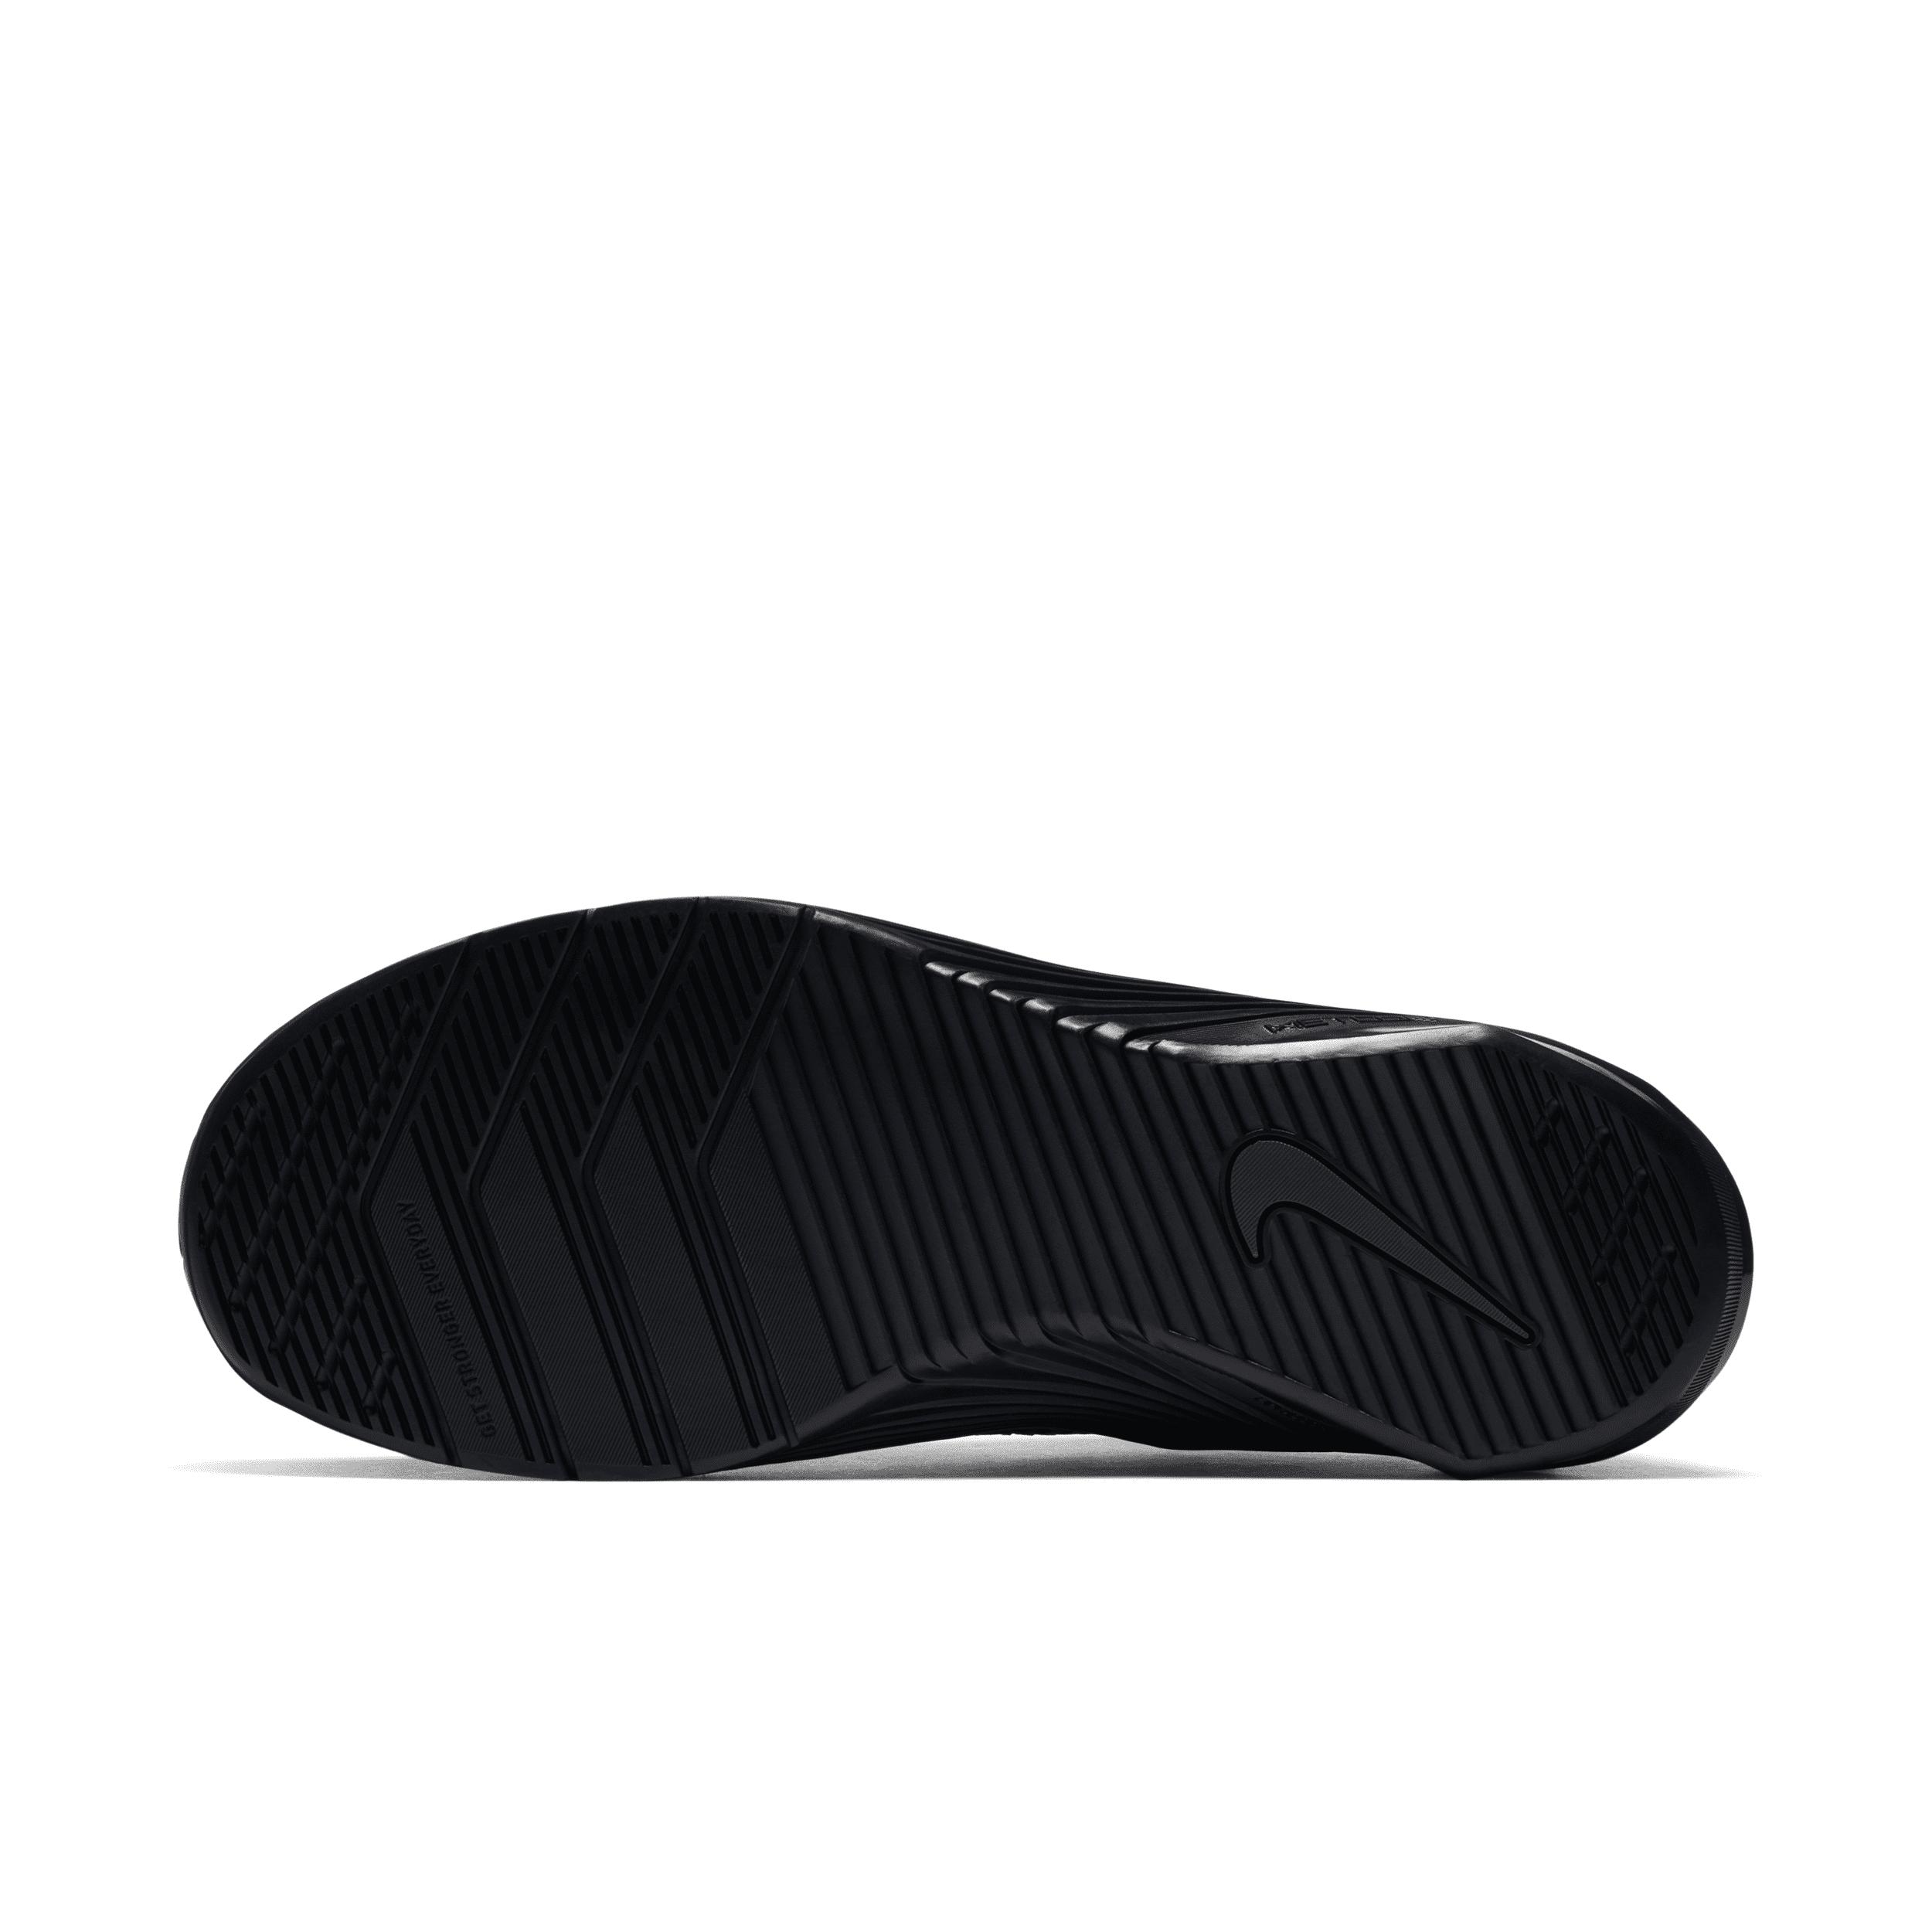 Nike Metcon 6 Training Shoes in Black | Lyst